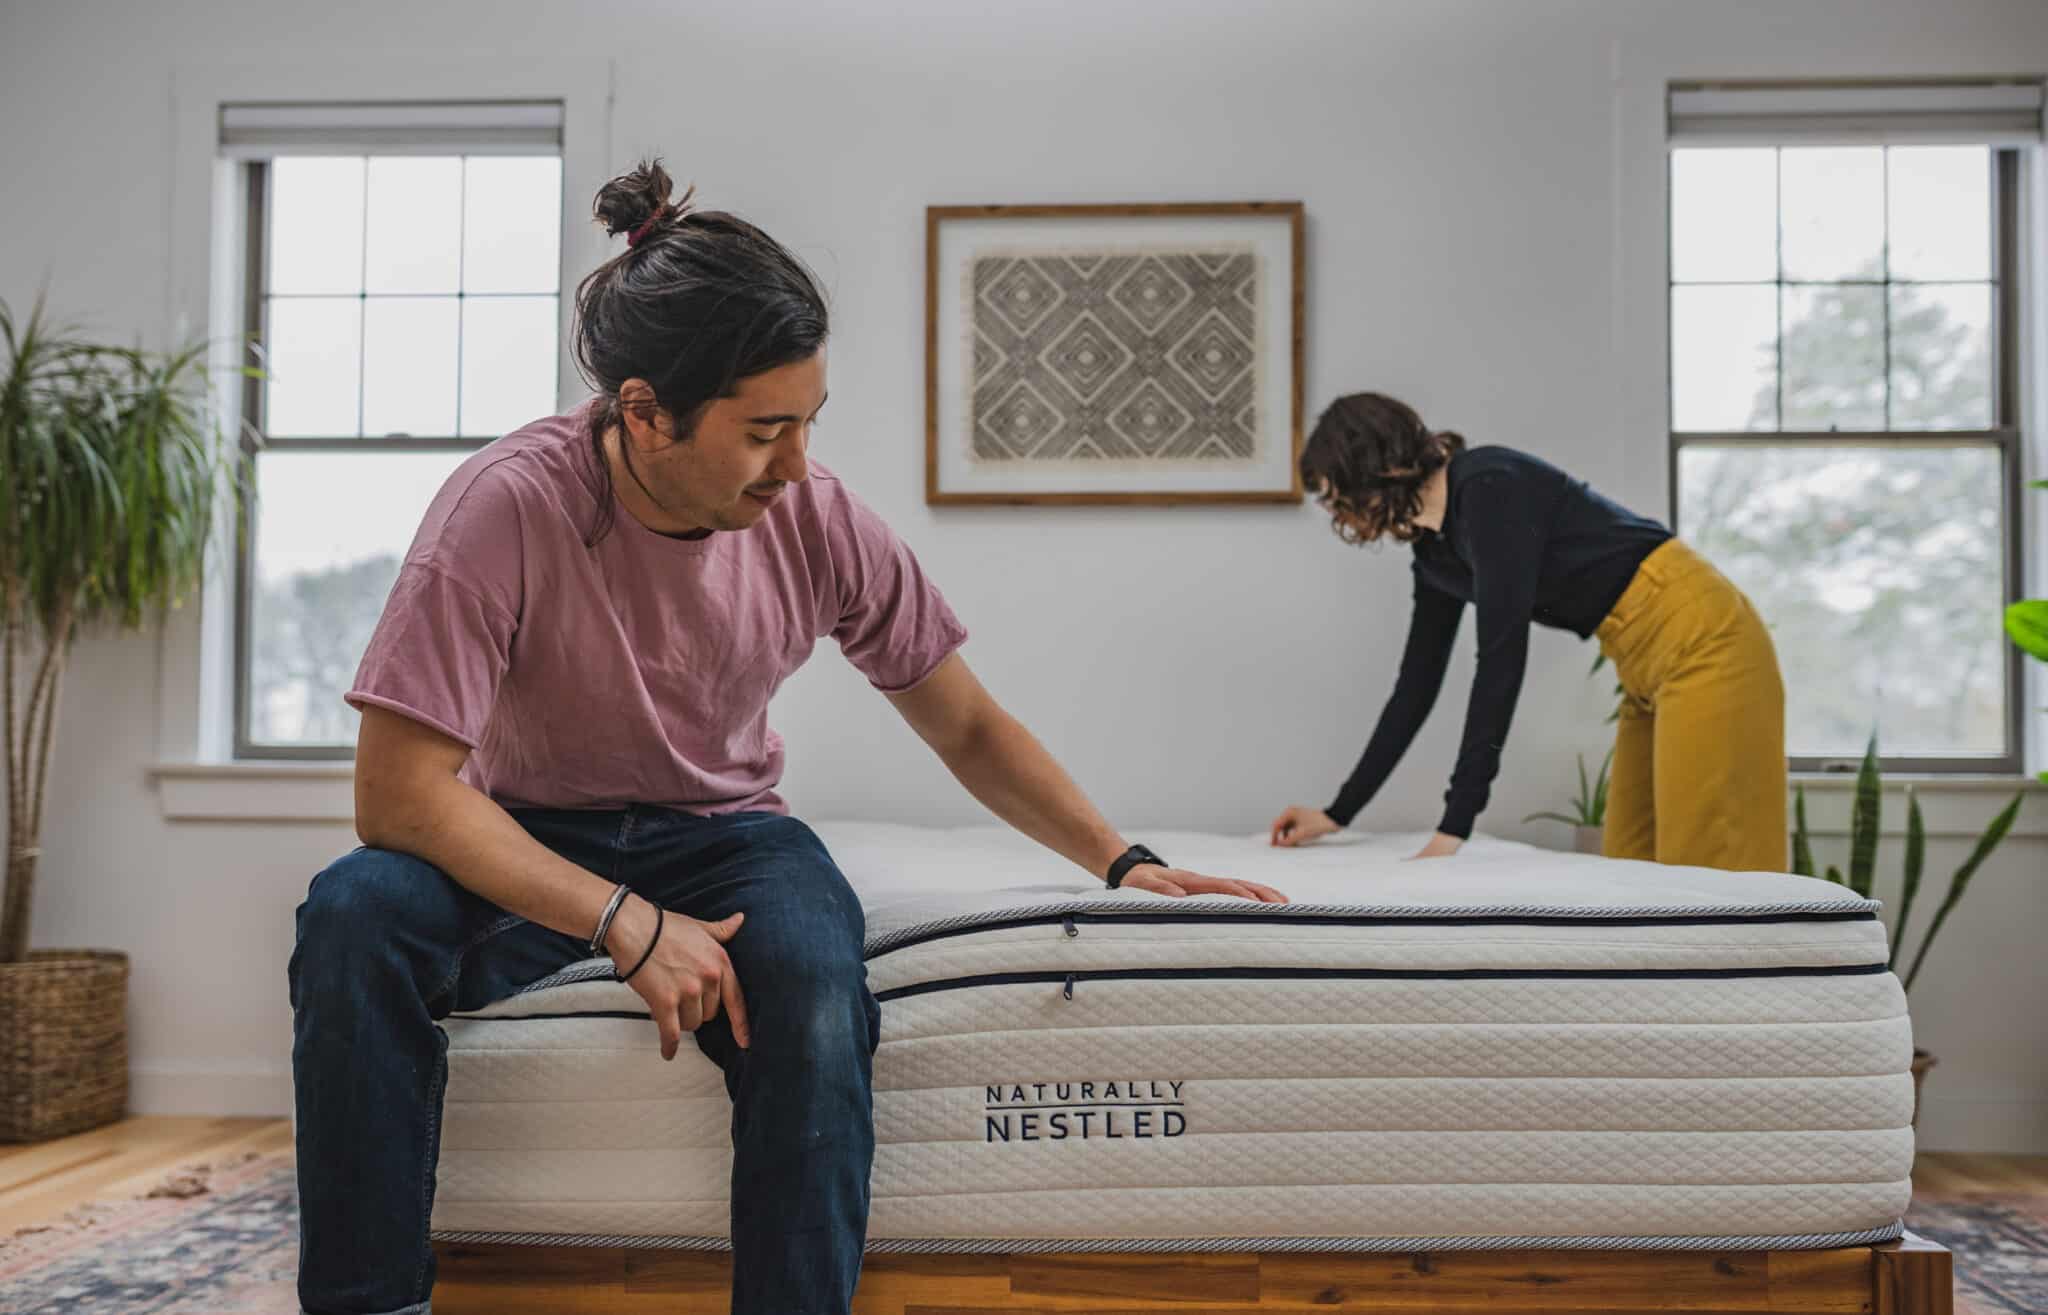 A man and woman test the comfort and support of an ethical mattress from Naturally Nestled